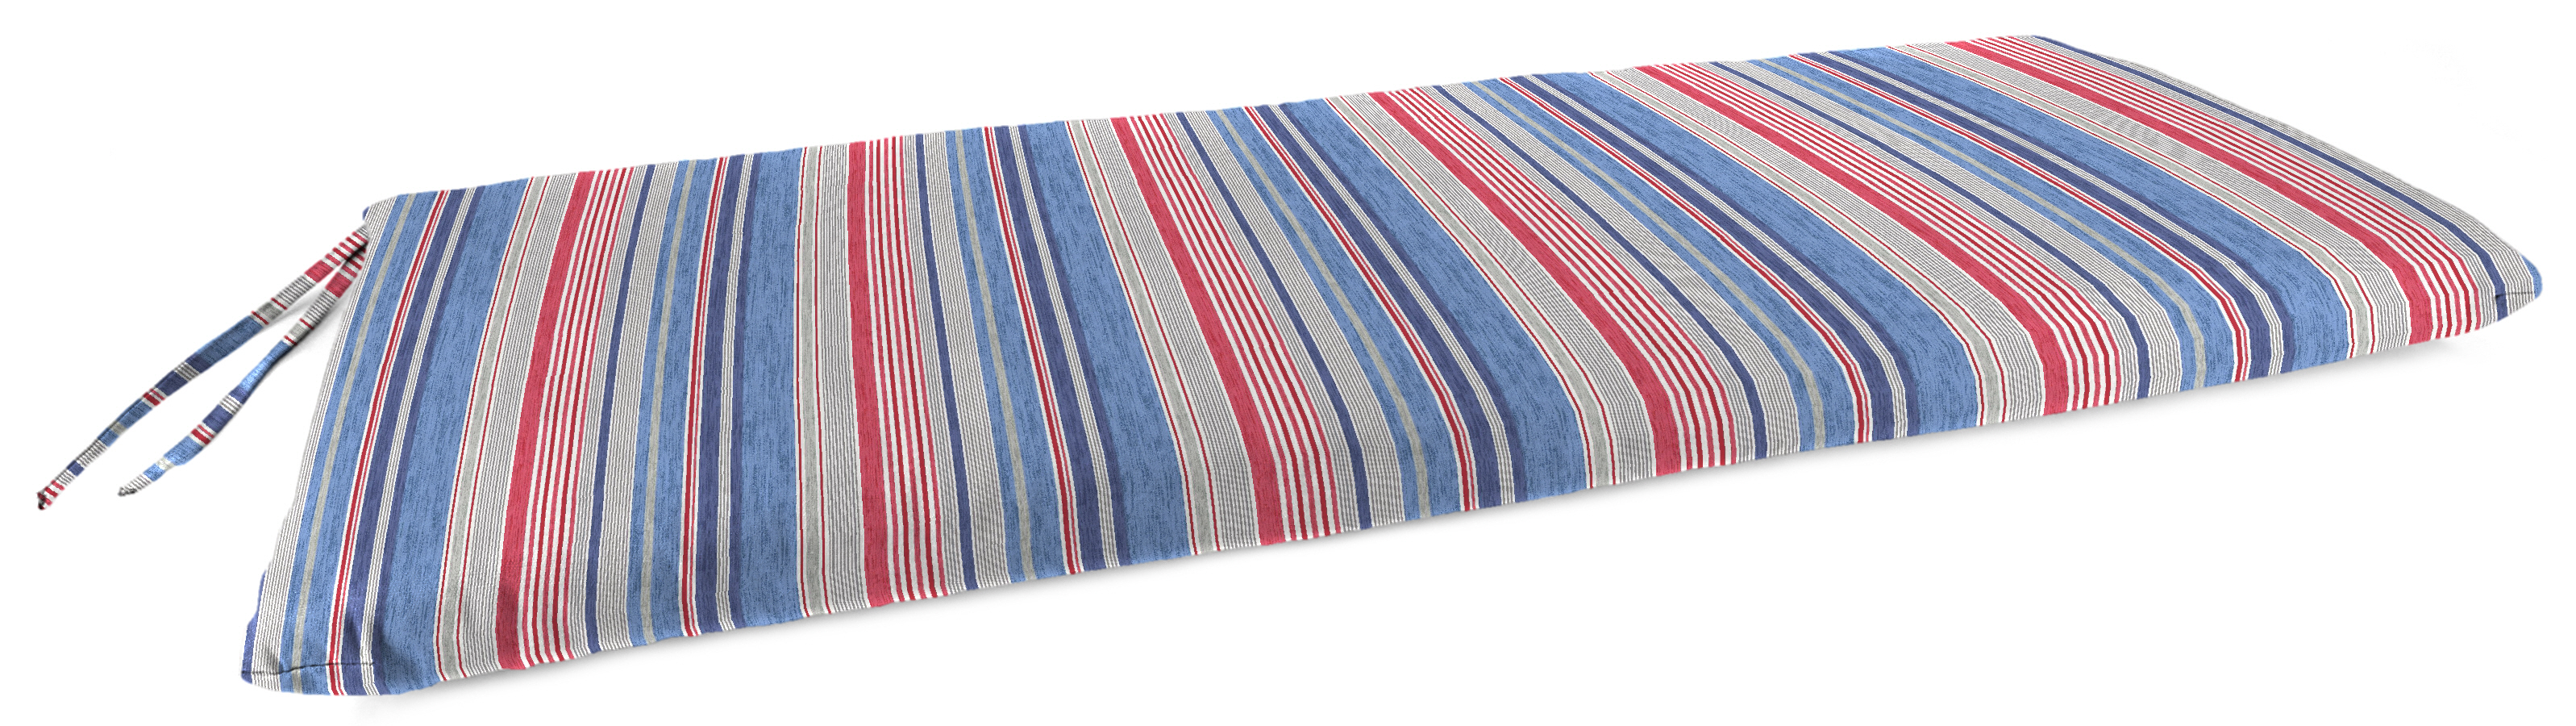 2 Person Patio Bench, Swing and Glider Cushion in The Right Stripe Blue Marine